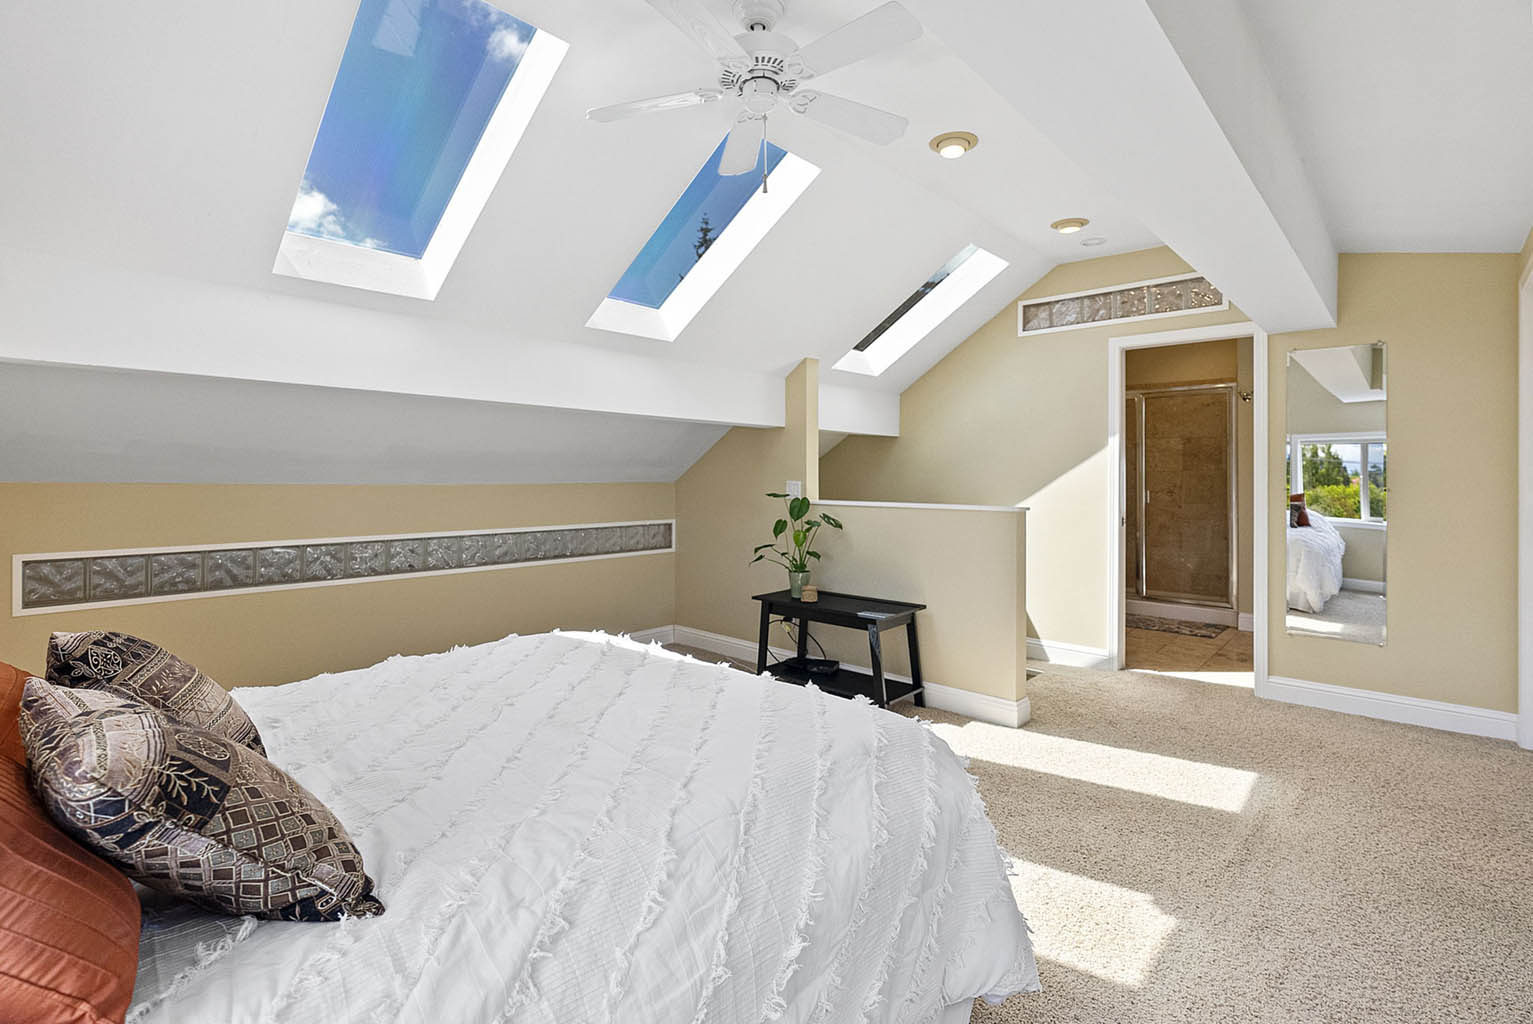 Primary bedroom with ceiling fan and skylights